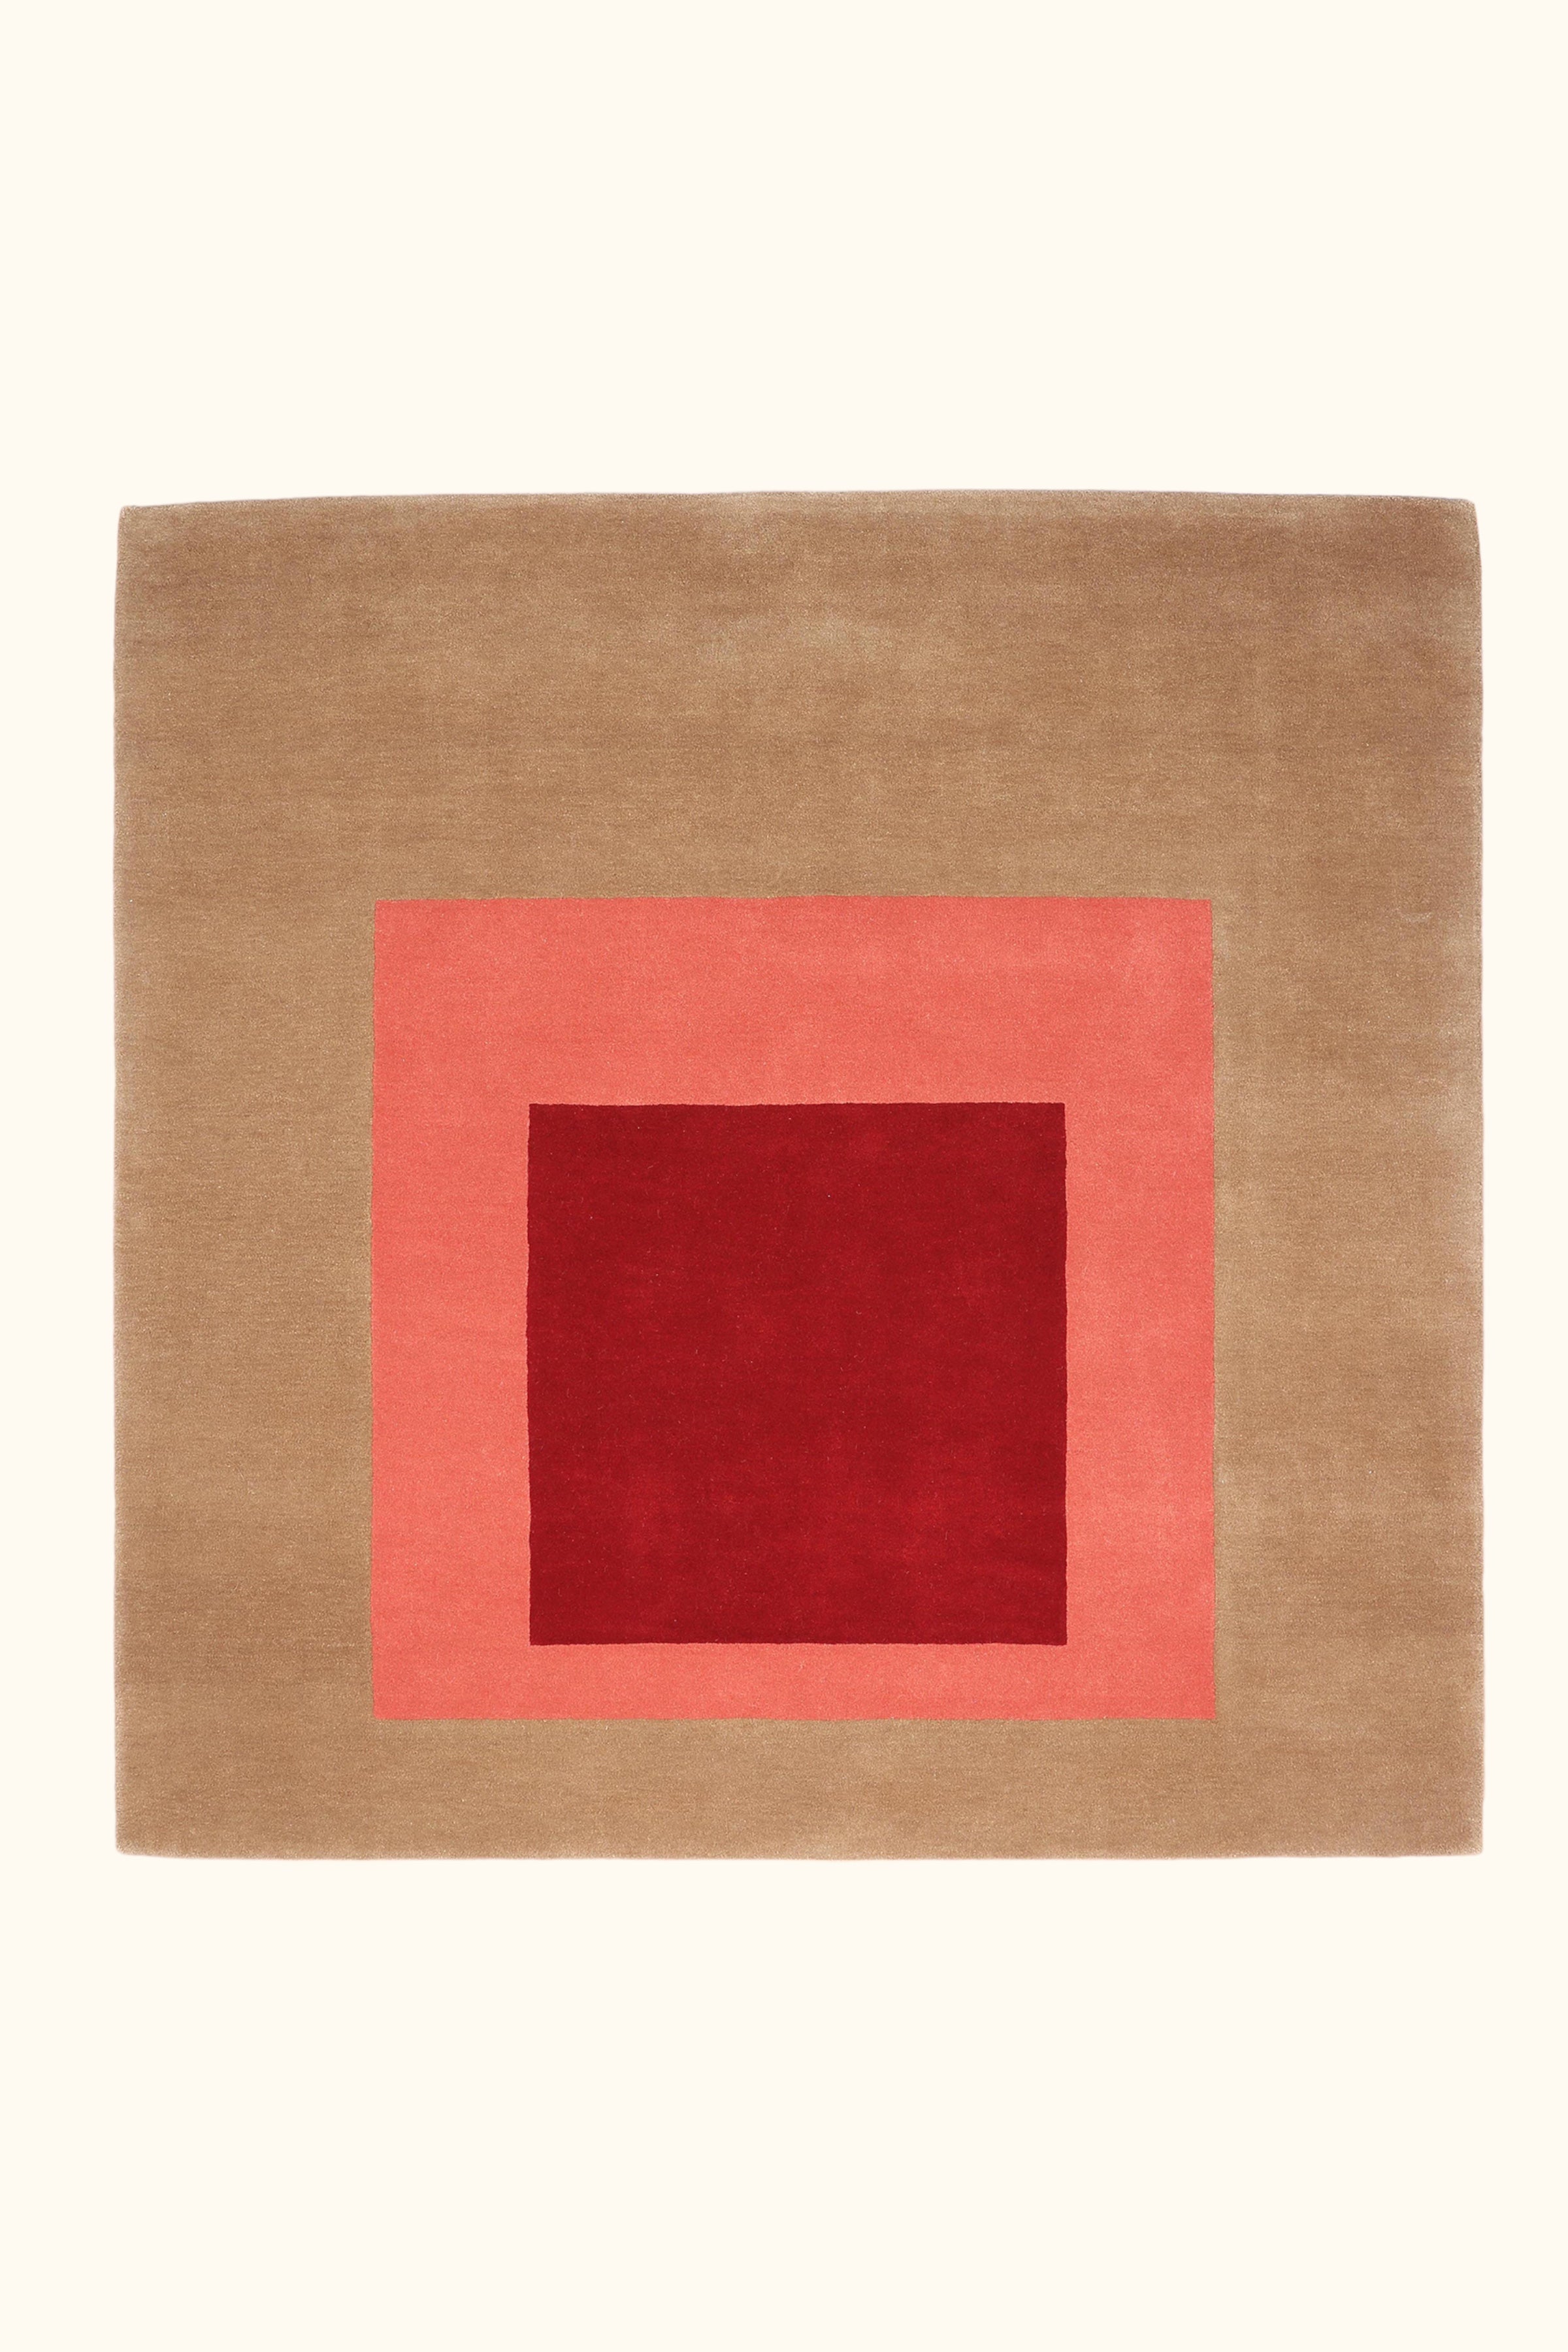 Josef Albers Bauhaus rug 'HOMAGE TO THE SQUARE' Brown/Red 175x175 cm